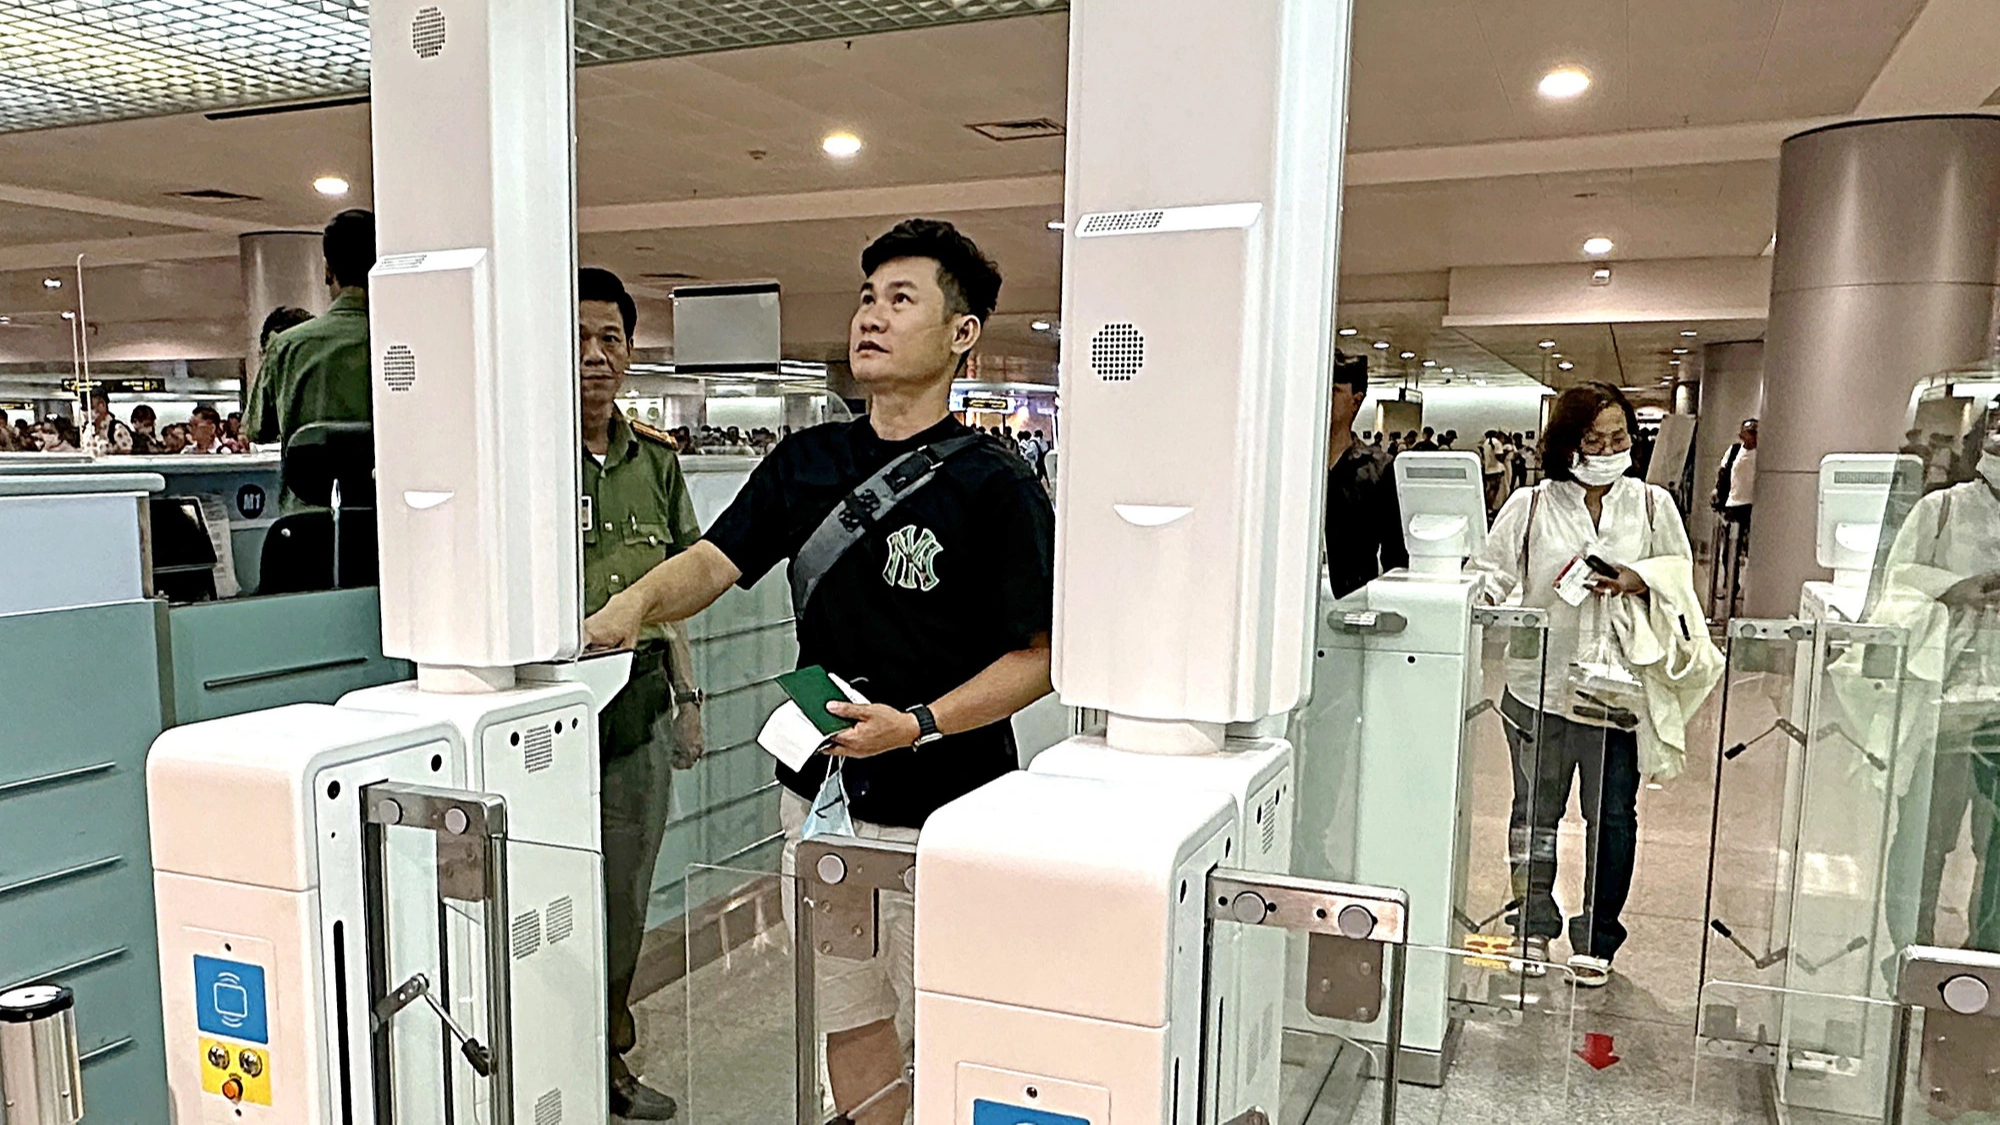 Multi-airline check-in service to be launched in airports across Vietnam